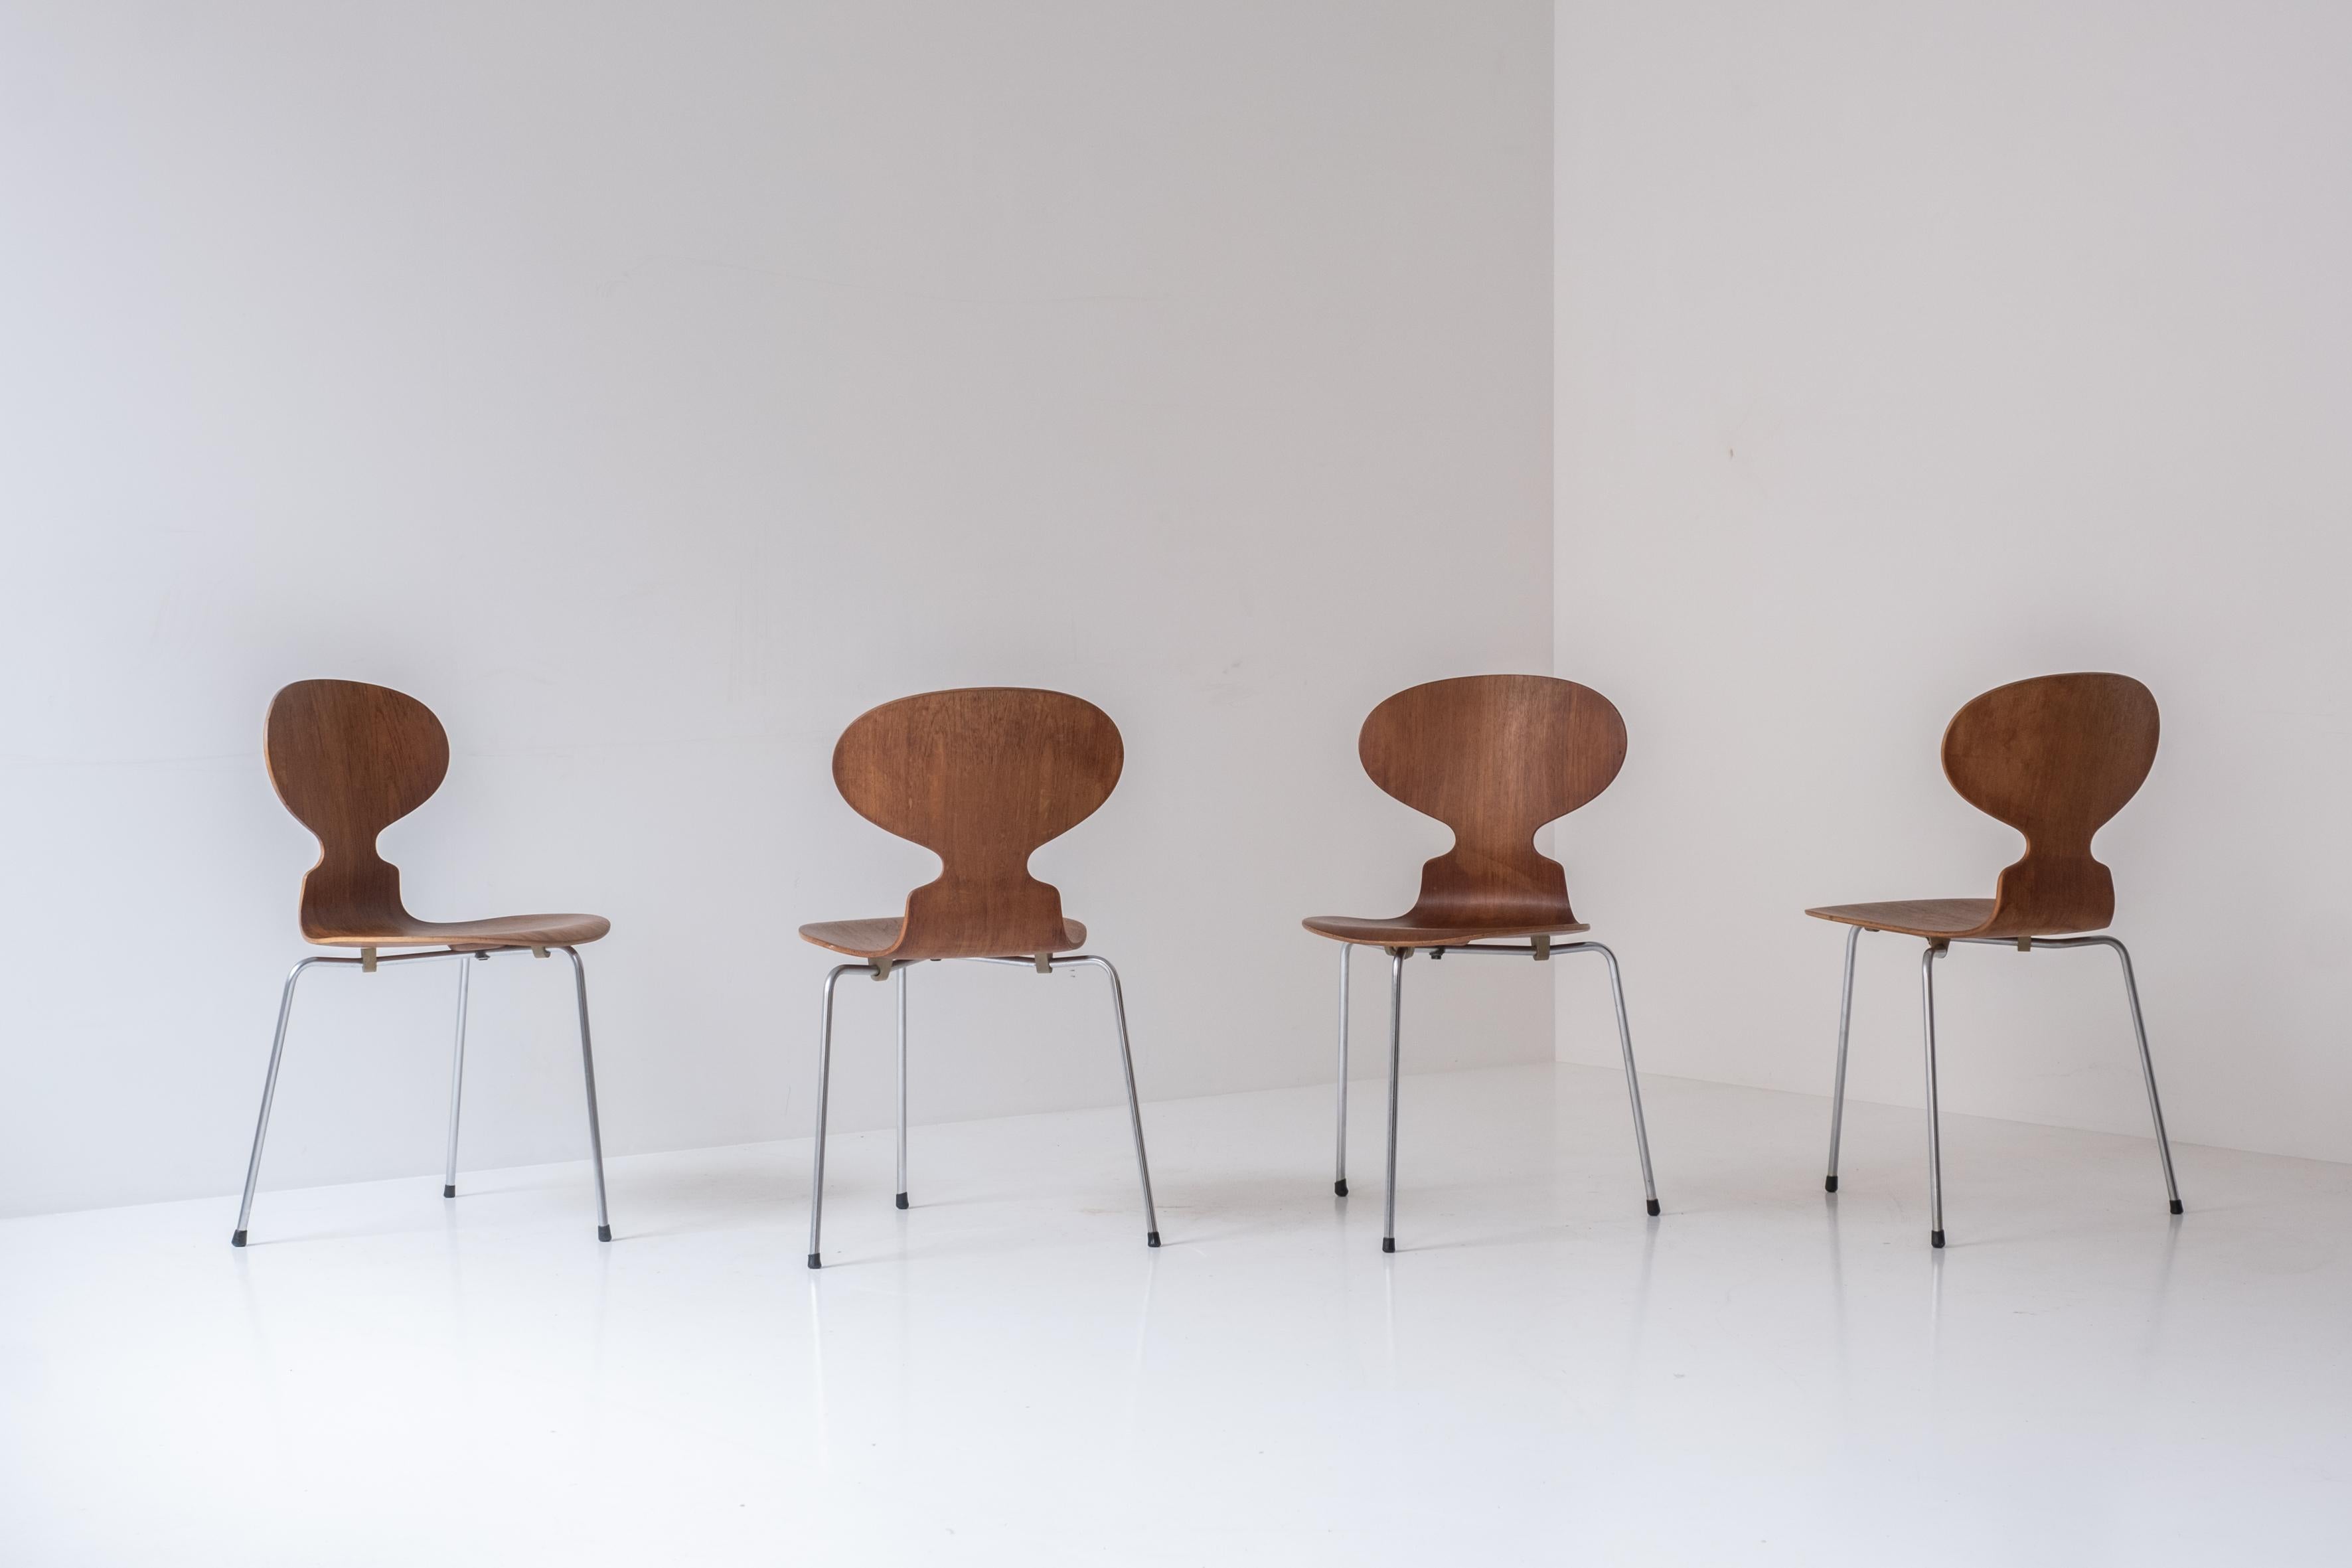 Set of four early ‘Ant’ chairs designed by Arne Jacobsen for Fritz Hansen, Denmark 1951. This is Model No. 3100 and features teak seats and a tubular steel frames. Presented in a very good condition. Labeled underneath
